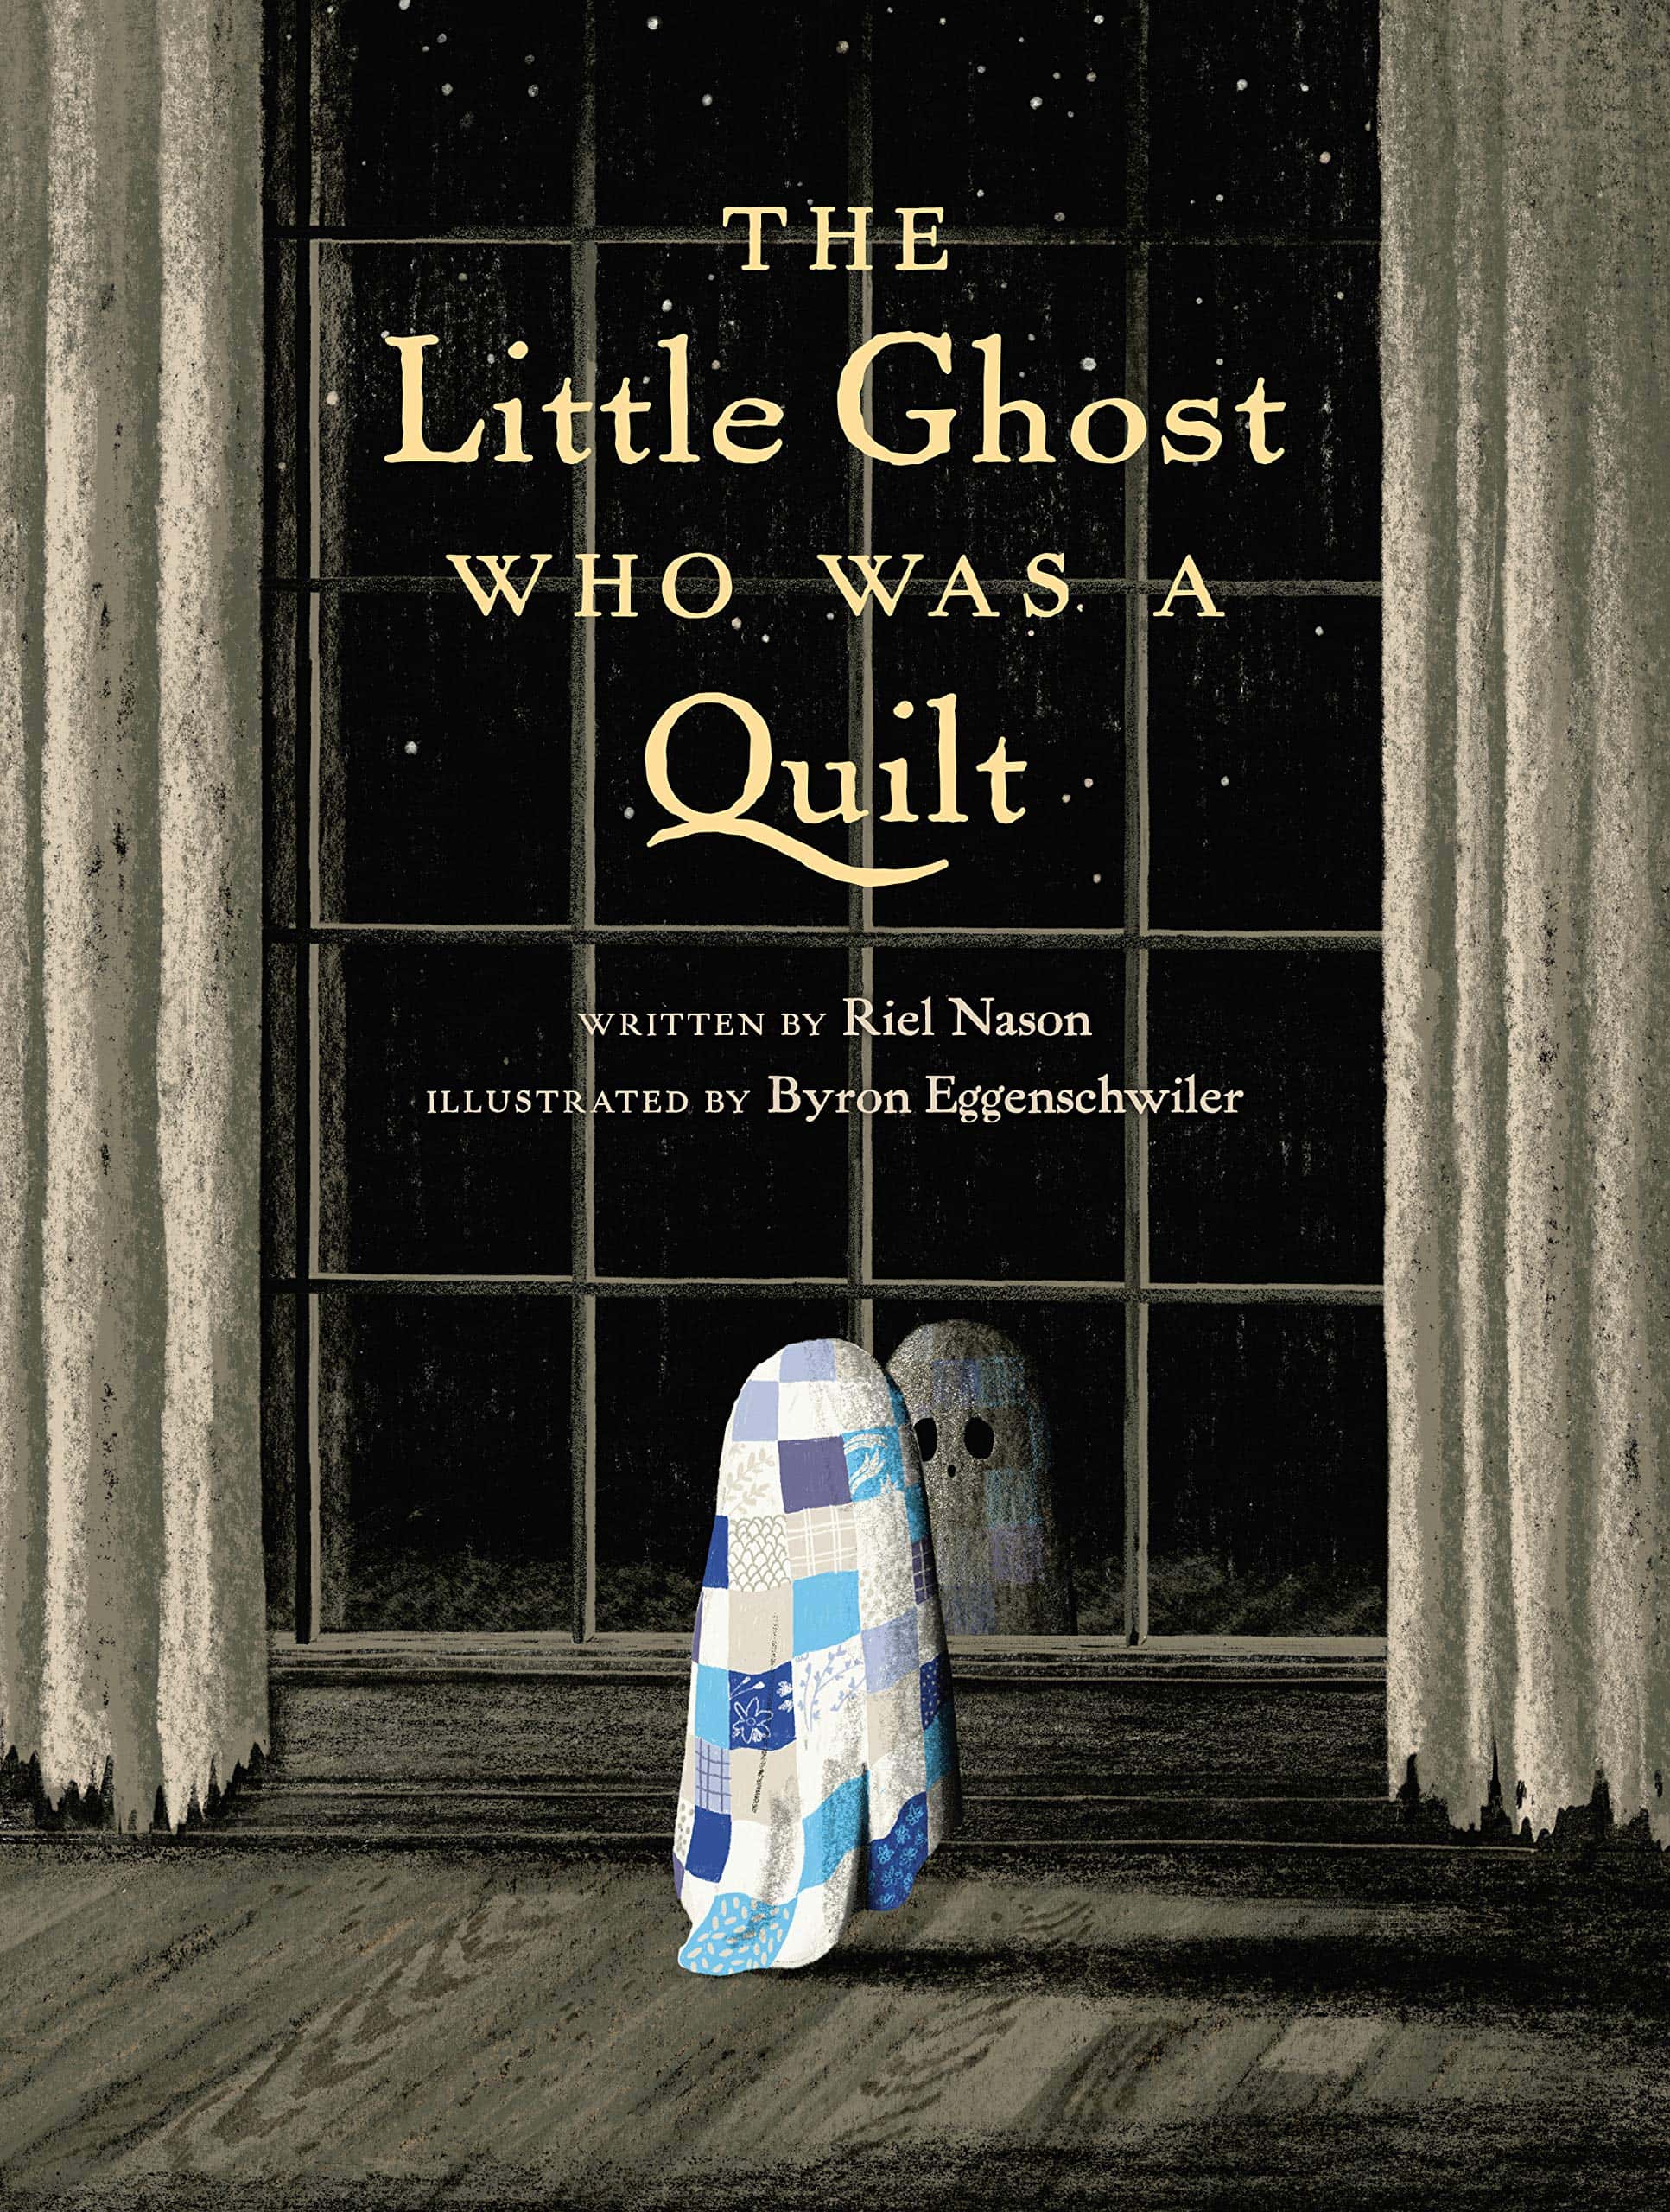 "The Little Ghost Who Was a Quilt" by Riel Nason